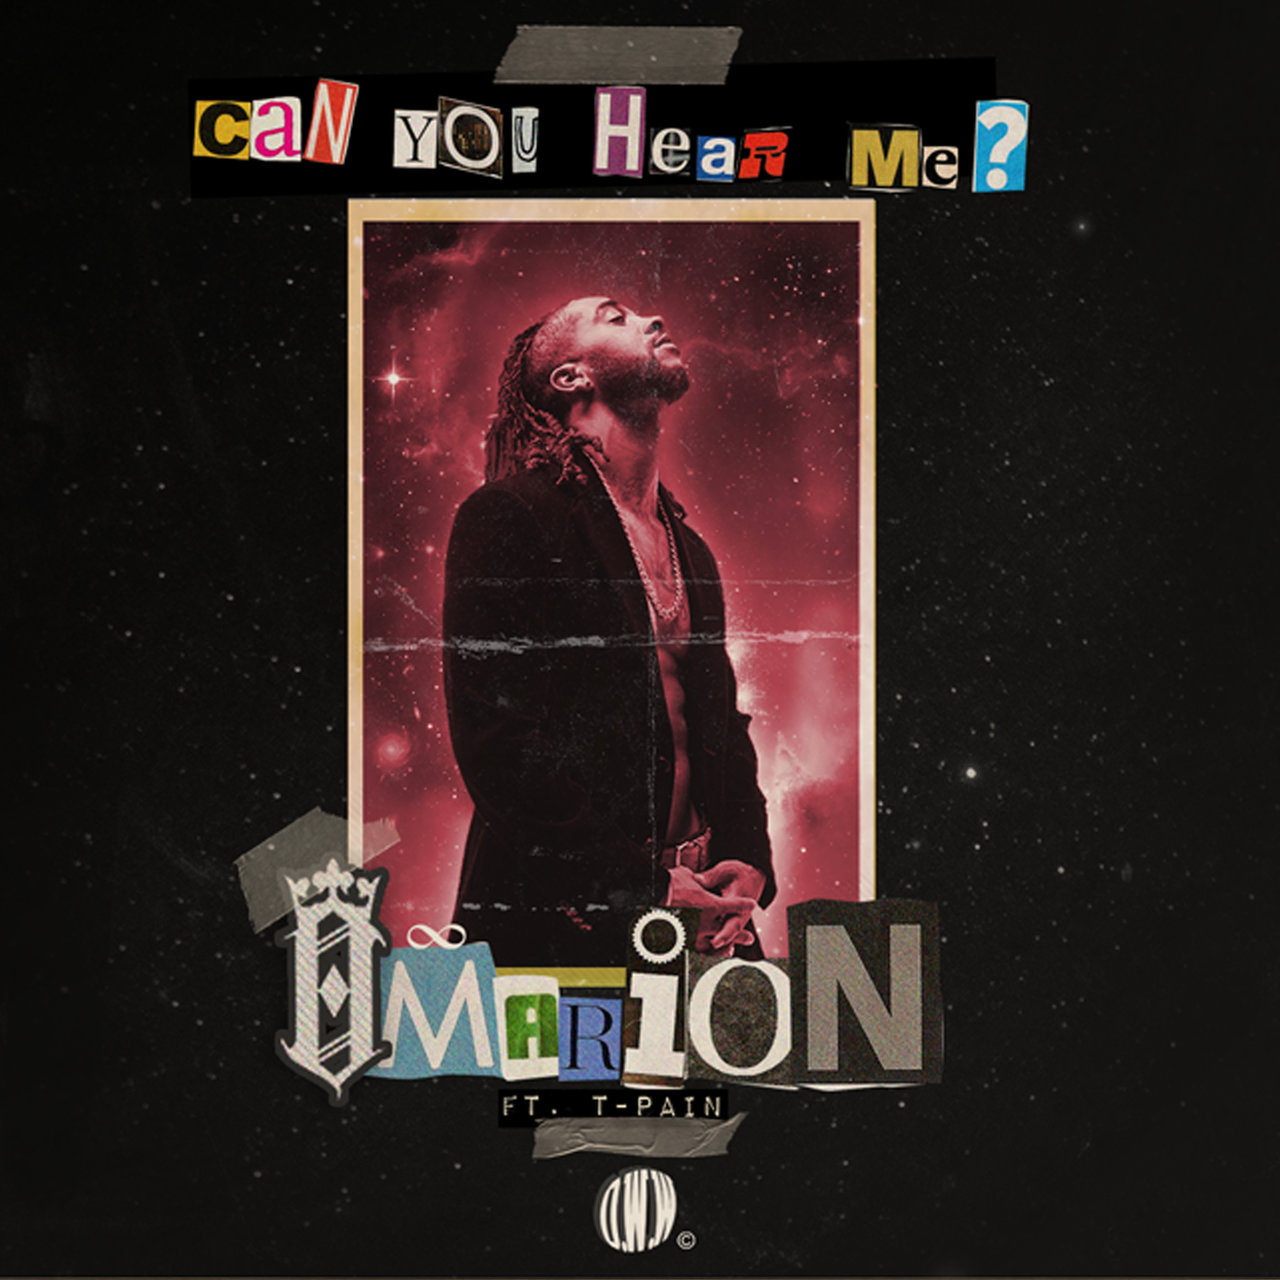 Omarion - Can You Hear Me? (ft. T-Pain) (Cover)